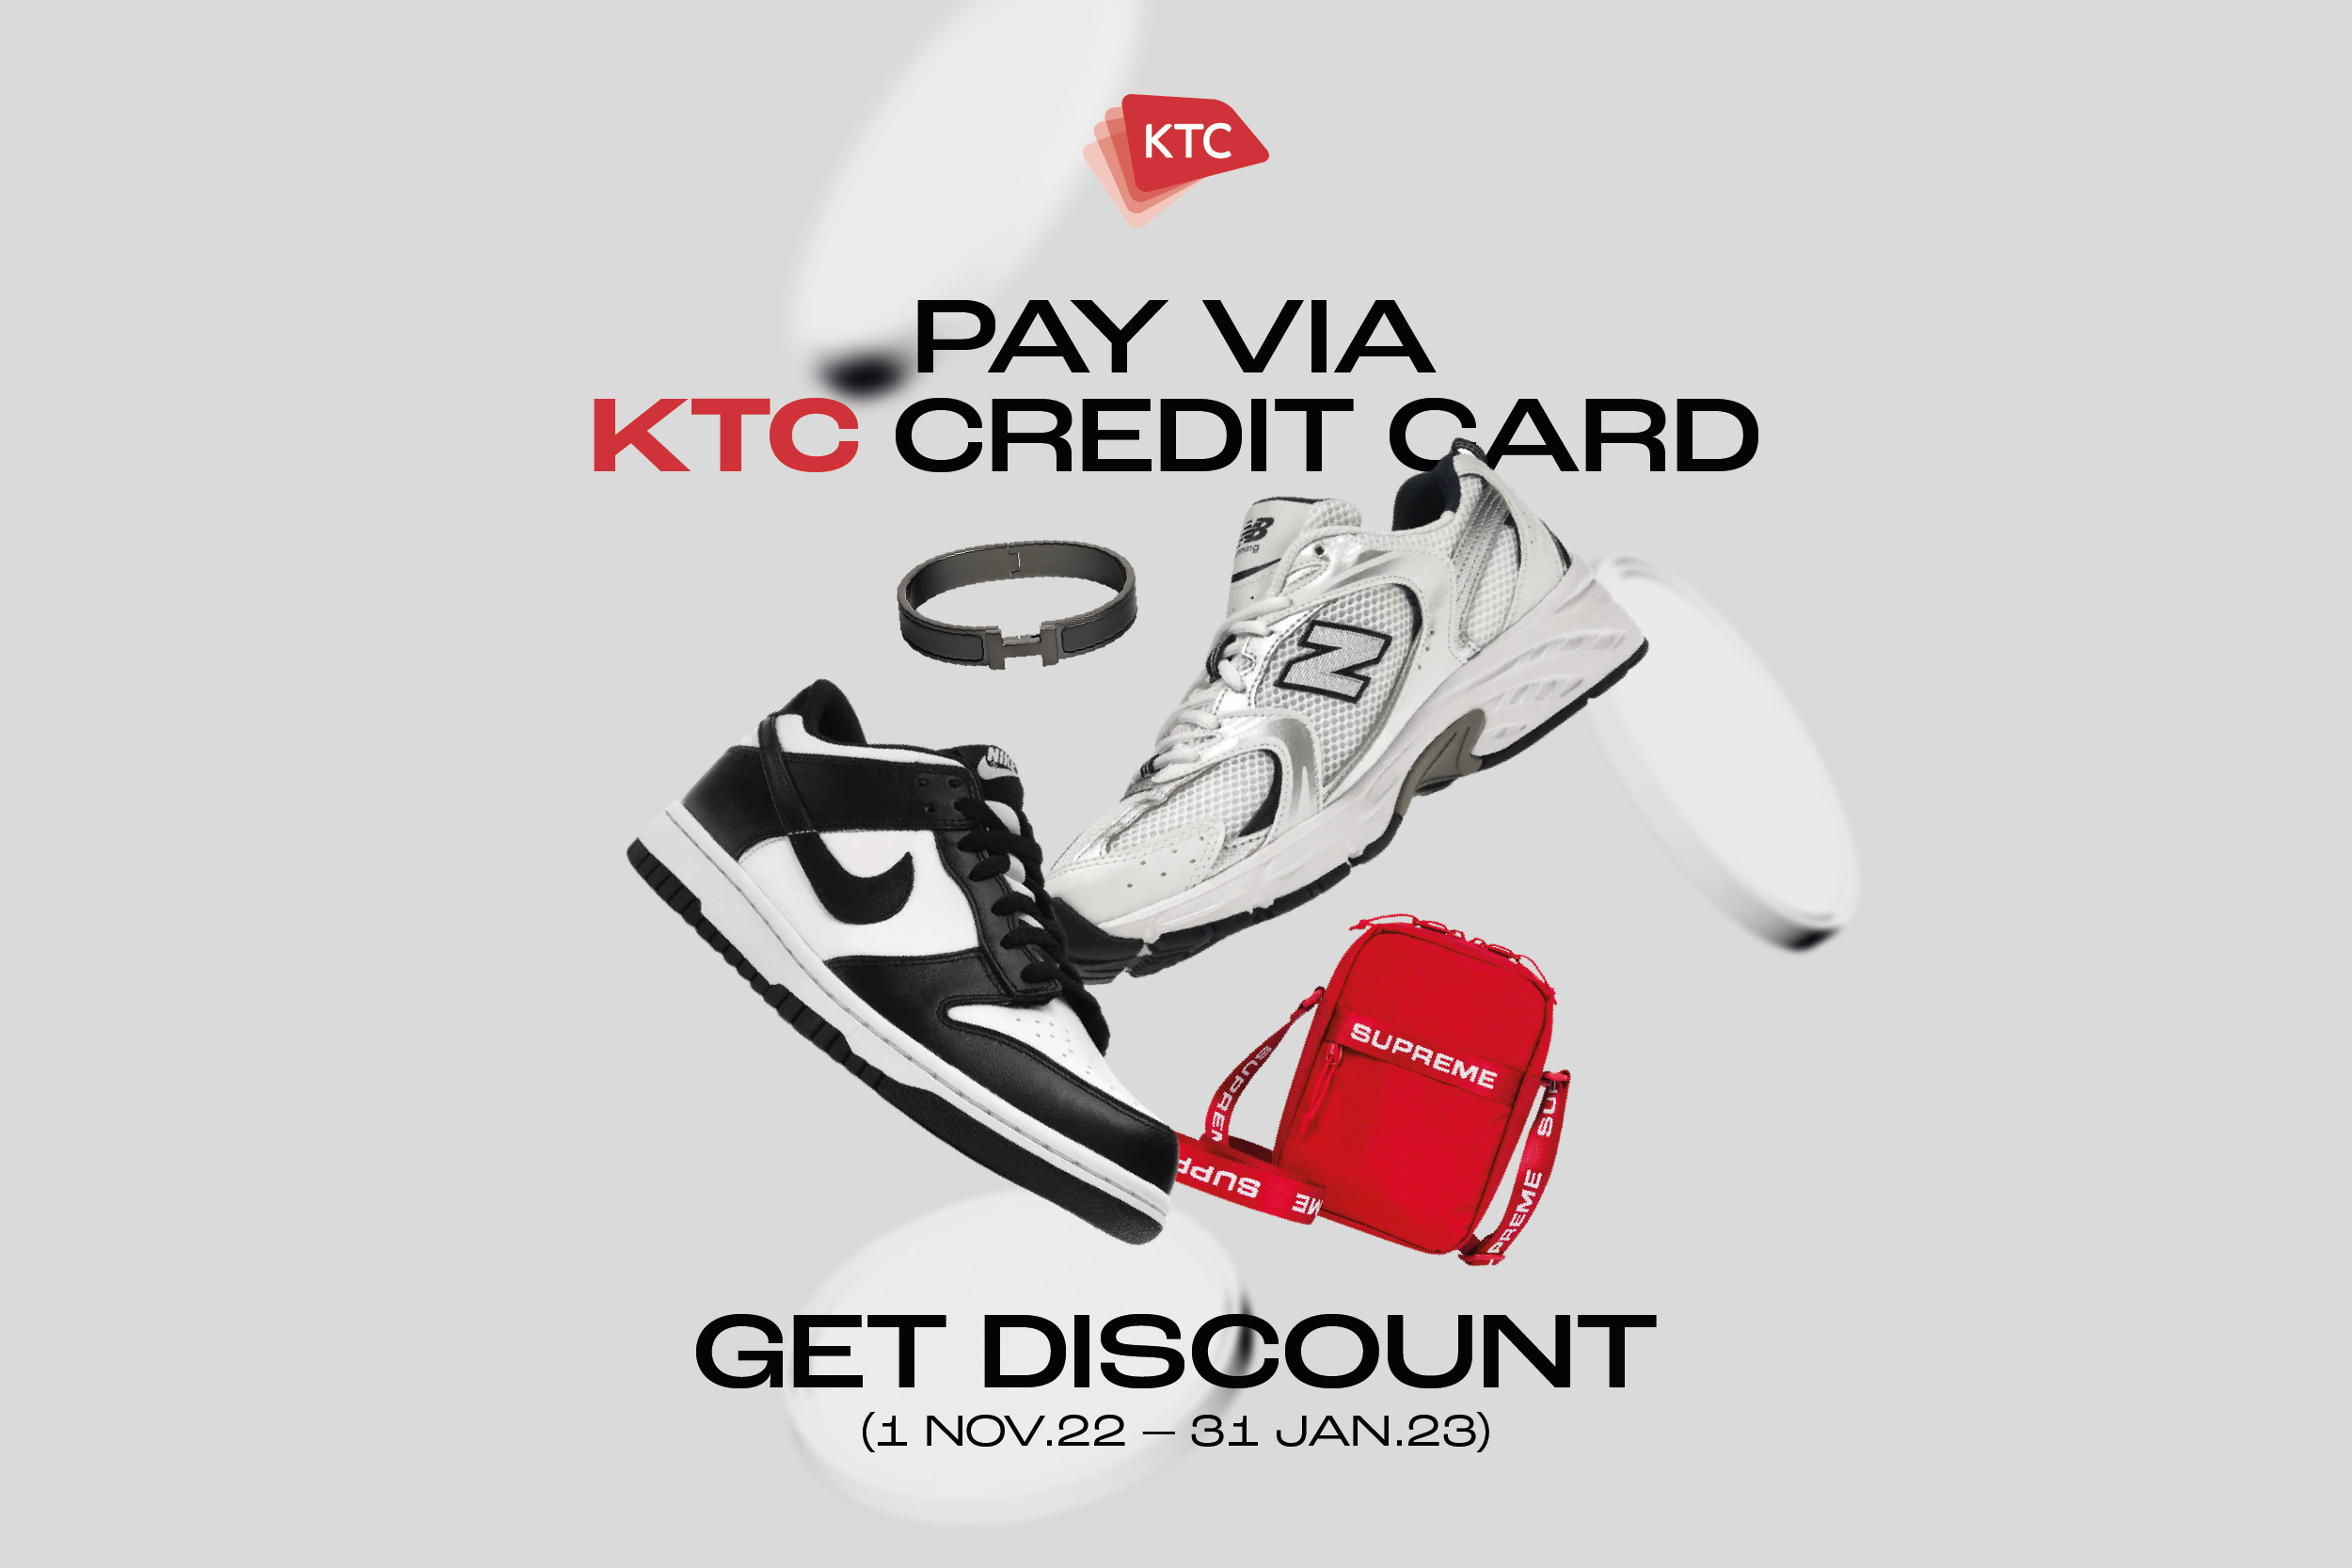 Late year Fever! Promo for Paying via KTC Credit Card